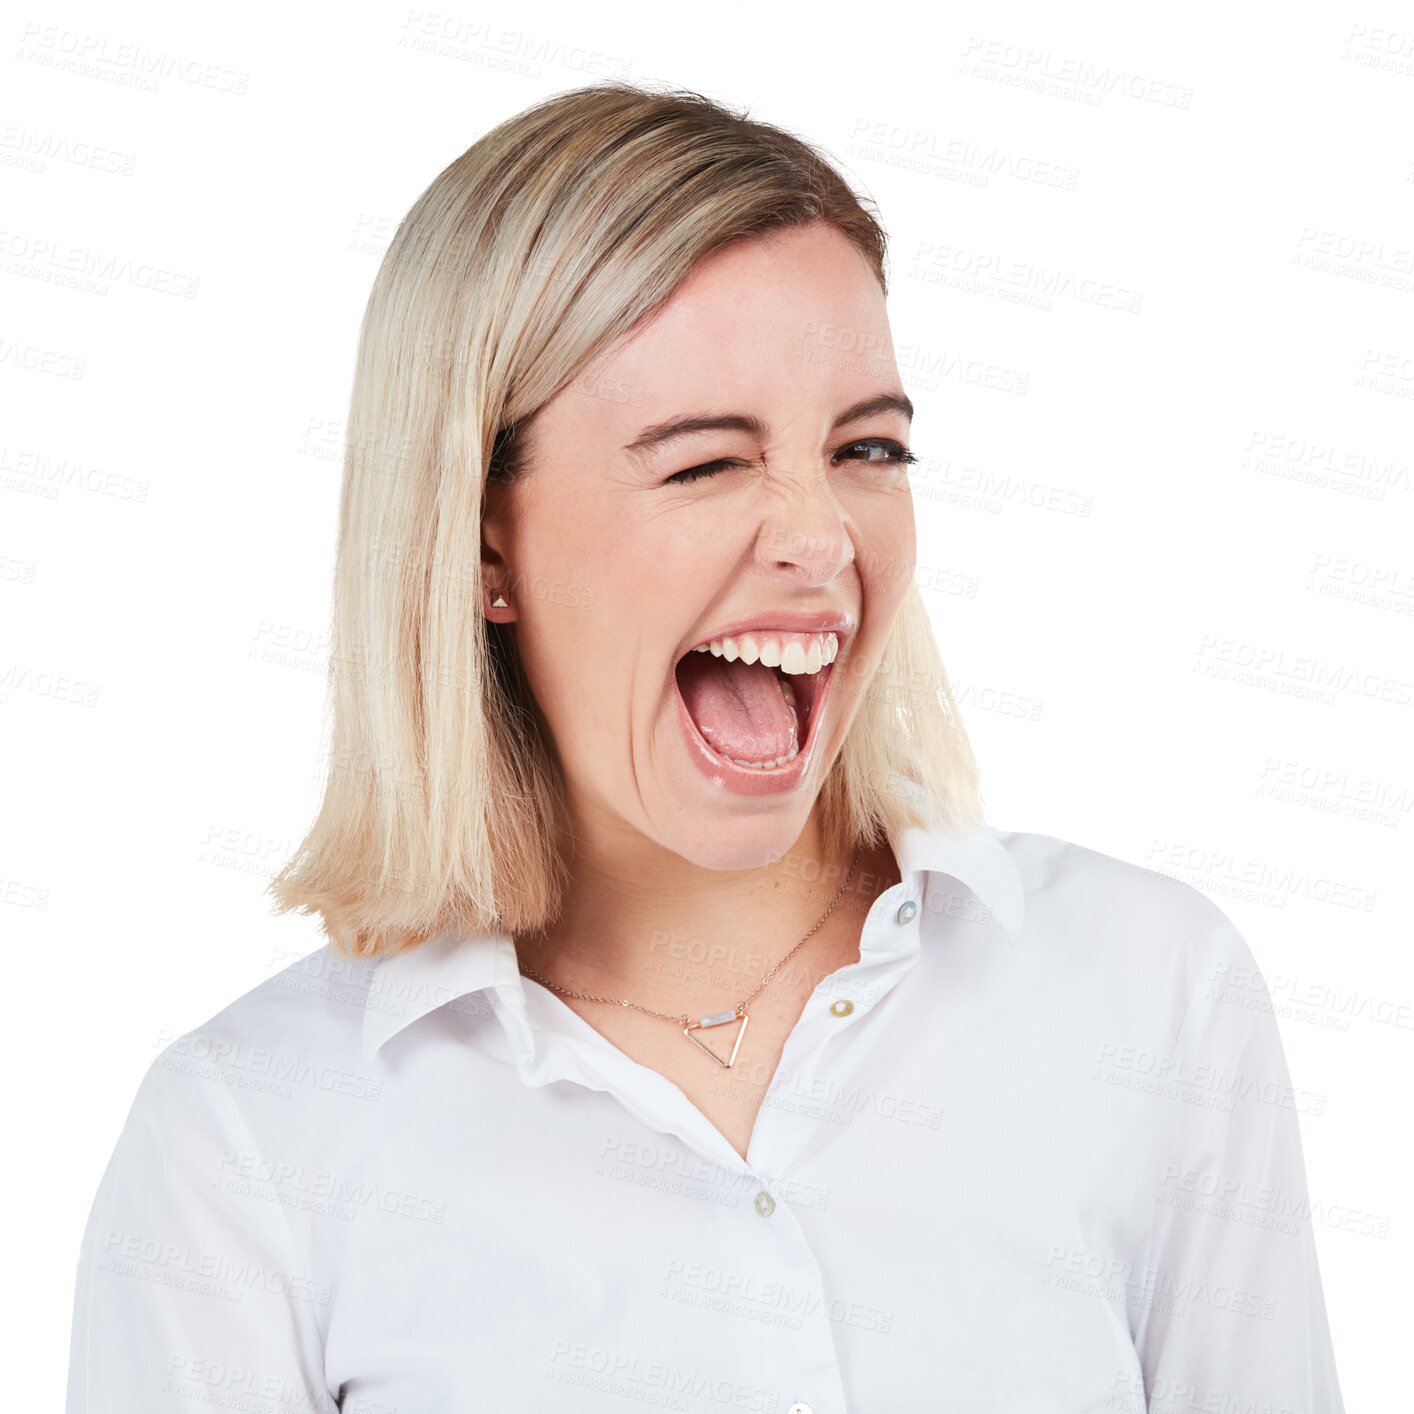 Buy stock photo Wink, happy and portrait of woman for work isolated on transparent png background. Flirty, smile and a young employee winking for expression, motivation or secret with a face headshot for corporate